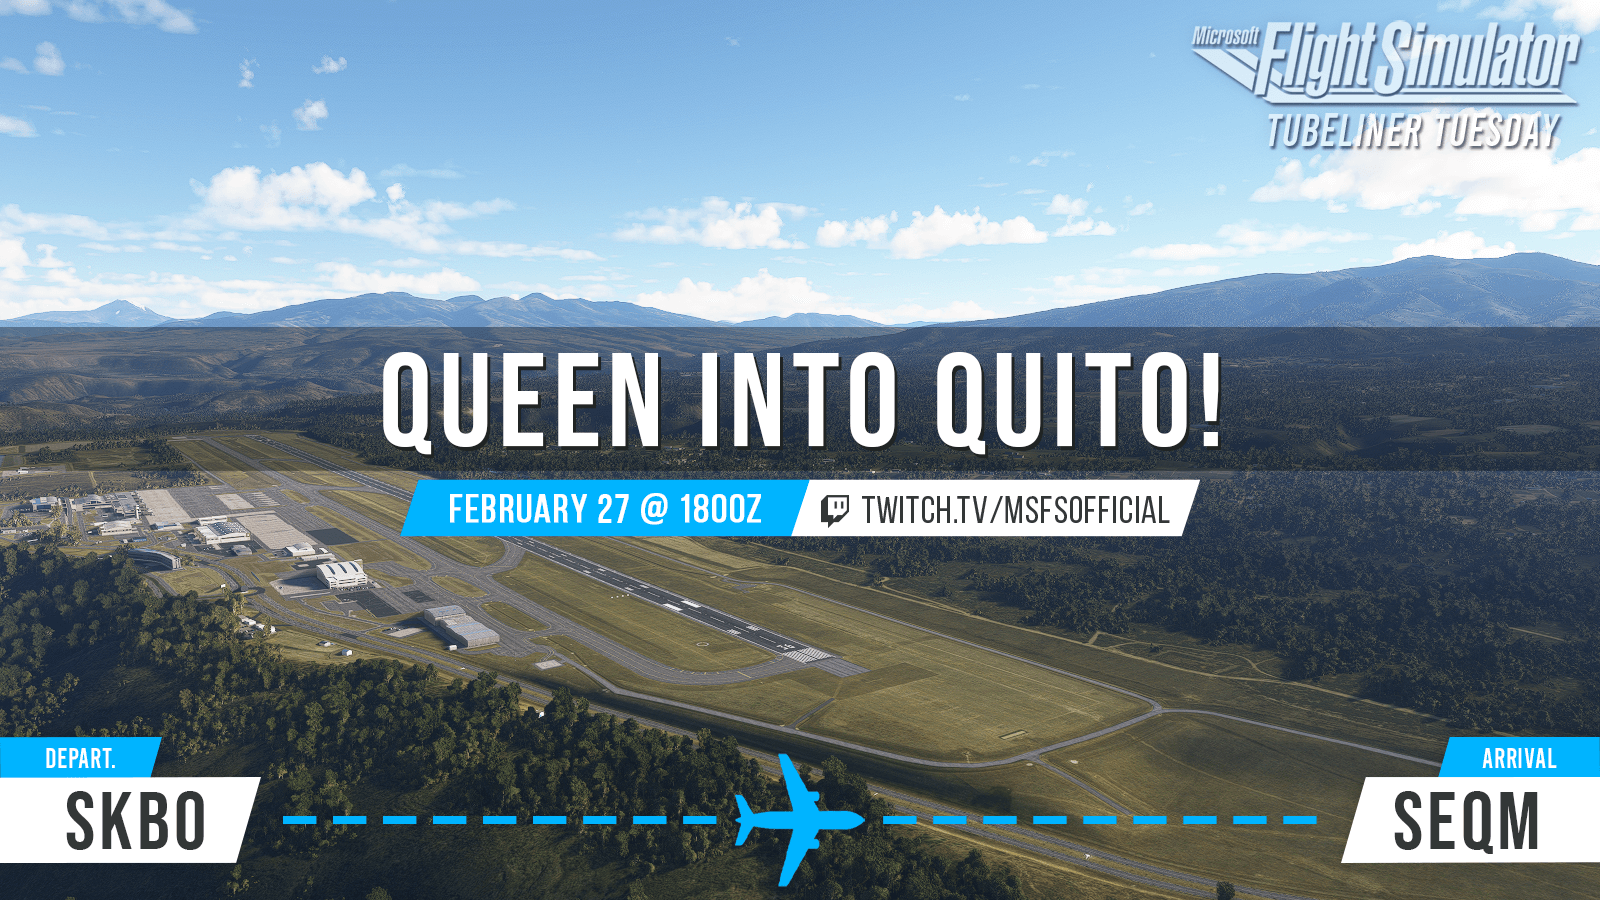 Tubeliner Tuesday: Queen Into Quito! February 27th at 1800 UTC. twitch.tv/msfsofficial